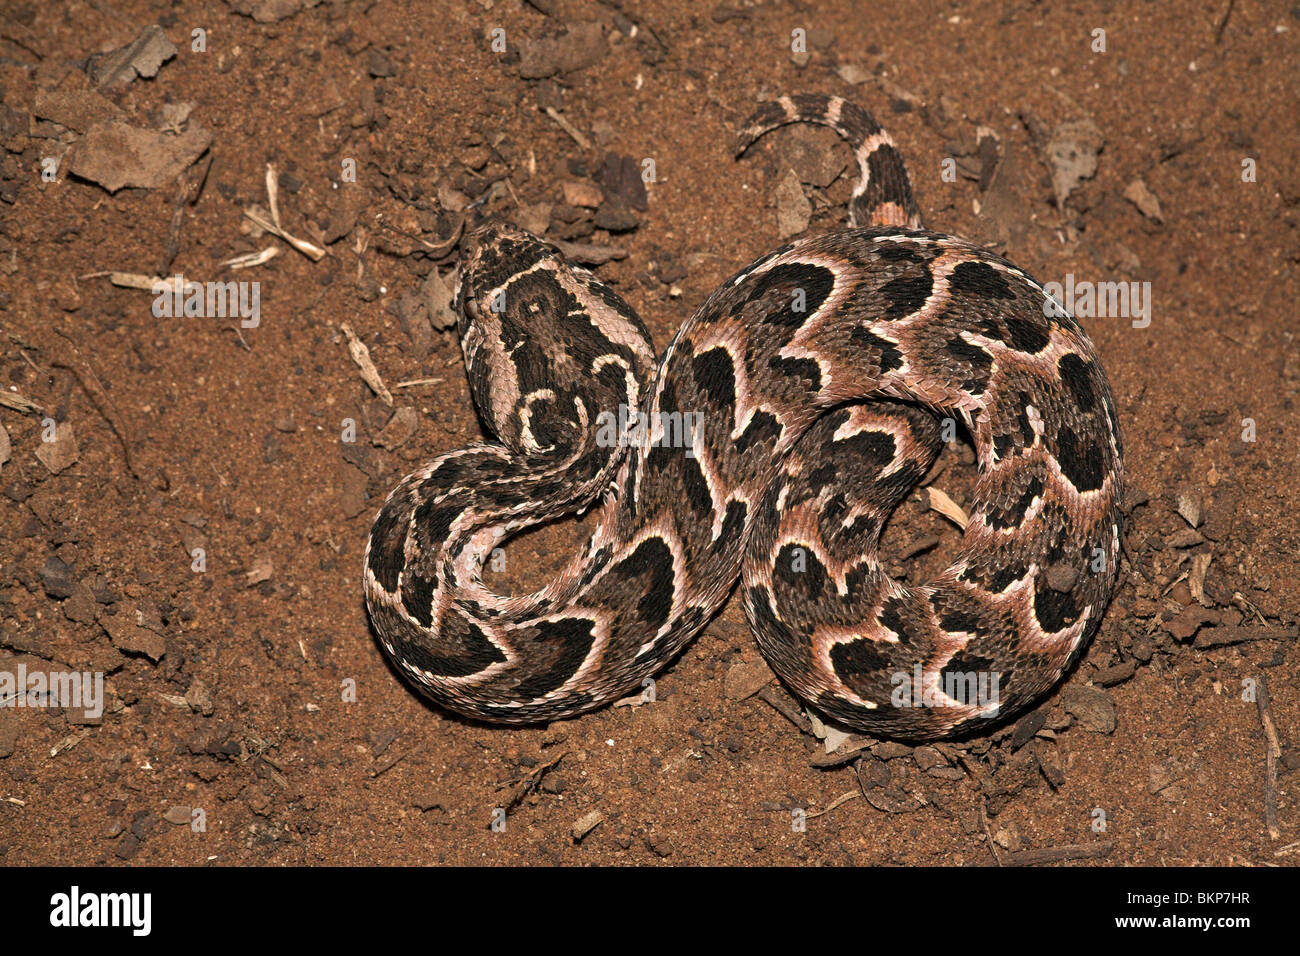 photo of a highly venomous puff adder, the puff adder is responsible for the most deadly snake bites in Africa every year (partly due to its large distribution!); Stock Photo